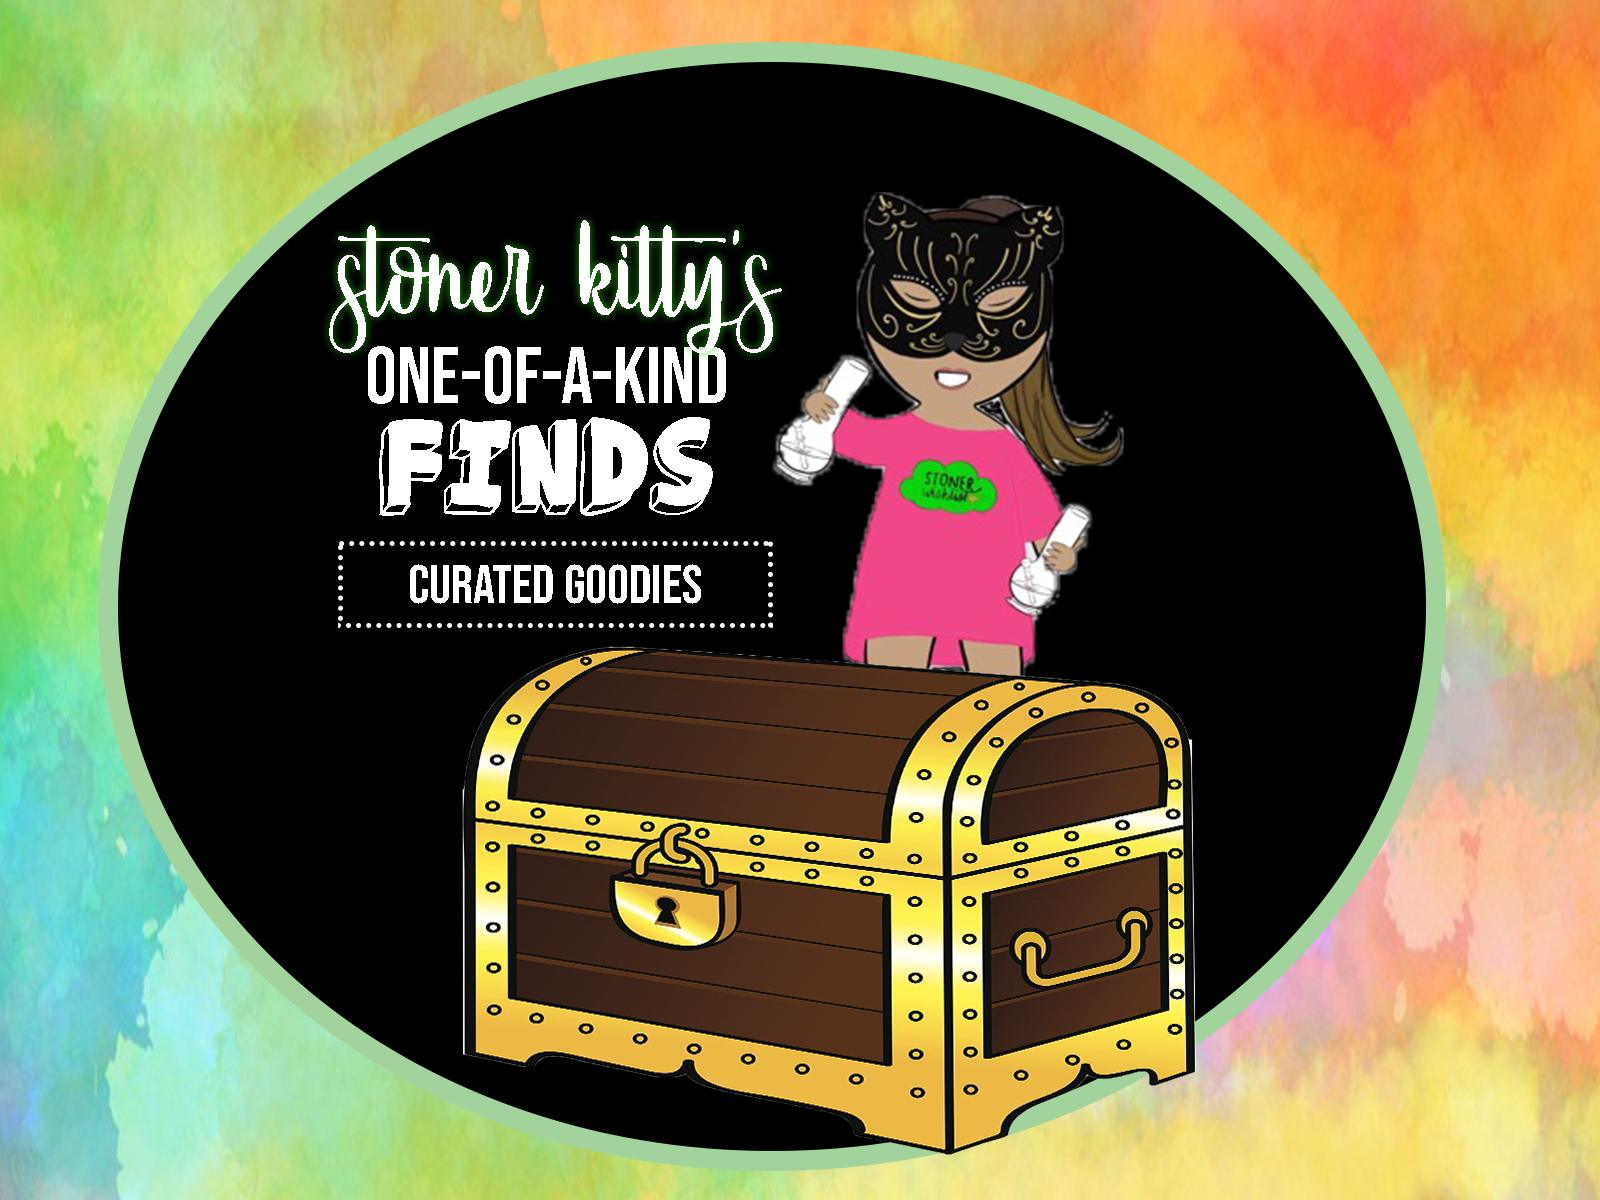 Stoner Kitty's One-of-a-kind Finds - The SWL Store 